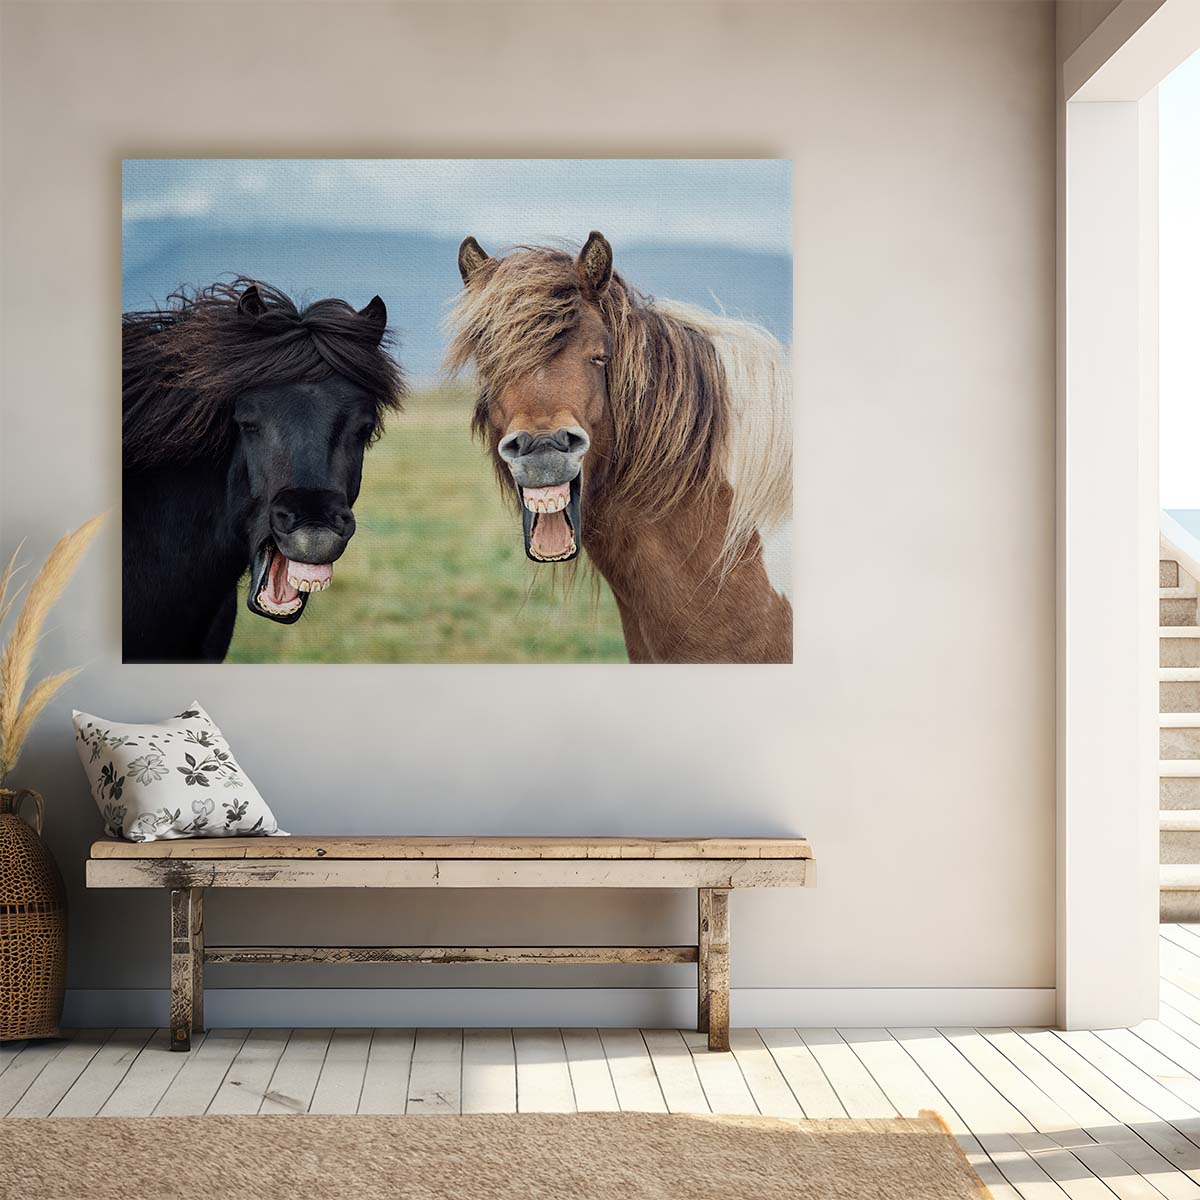 Joyful Smiling Horses in Sunny Countryside Wall Art by Luxuriance Designs. Made in USA.